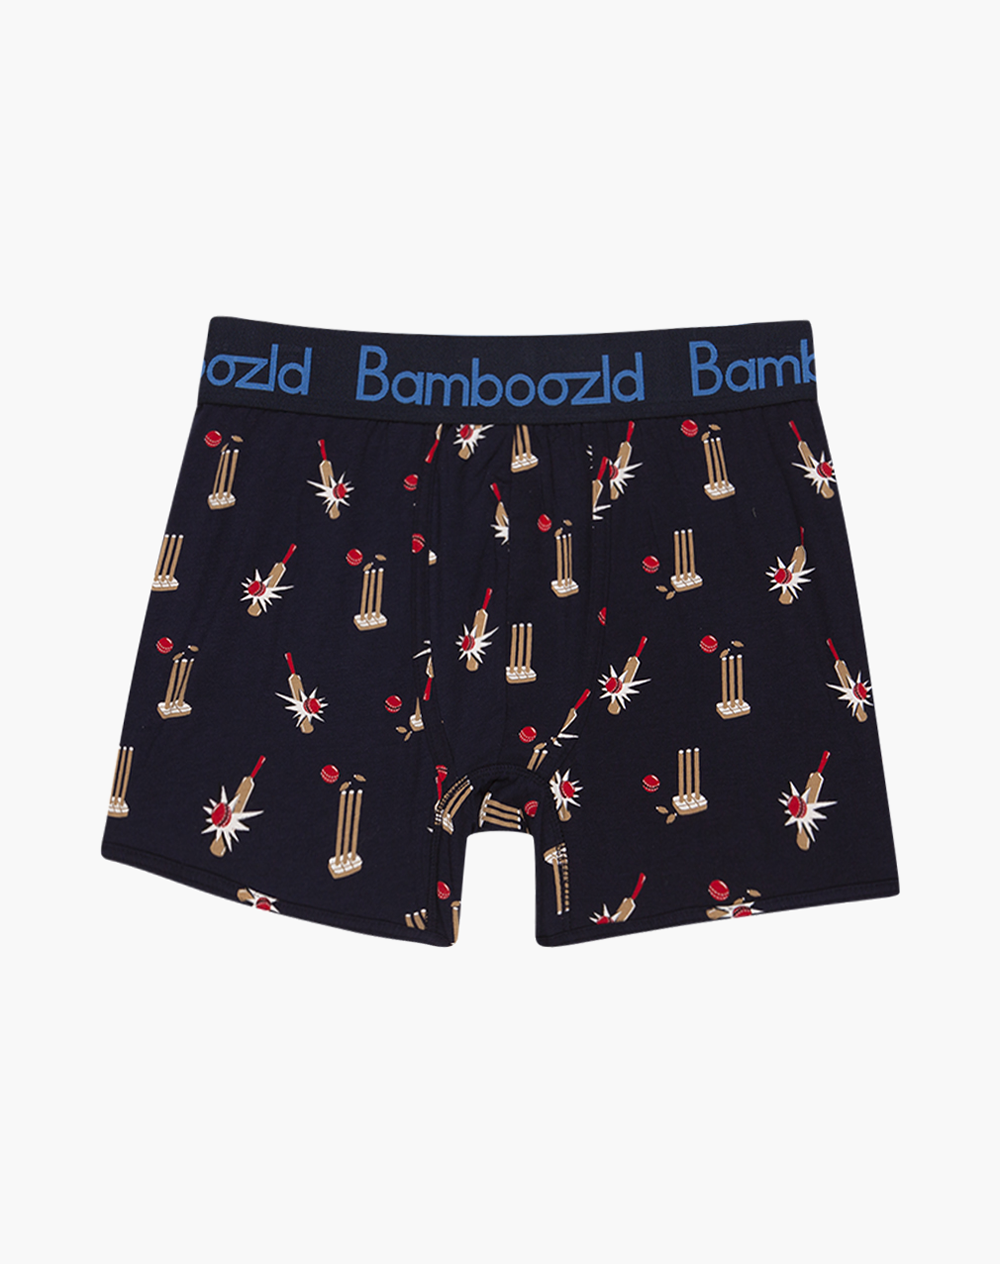 MENS HOWZ THAT BAMBOO TRUNK